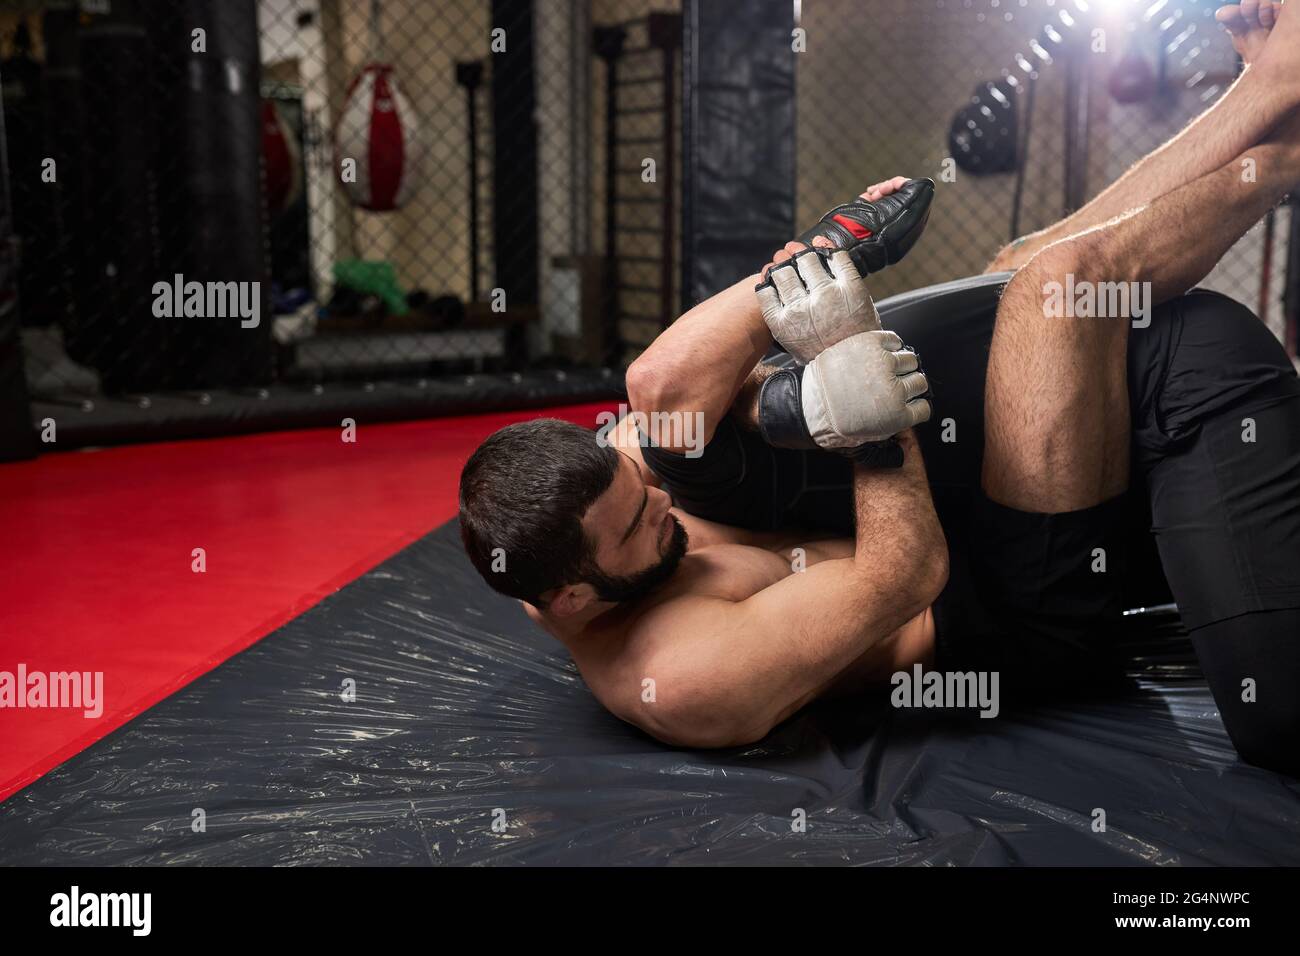 Fighter In Choke Hold Stock Photo by ©creatista 16352665